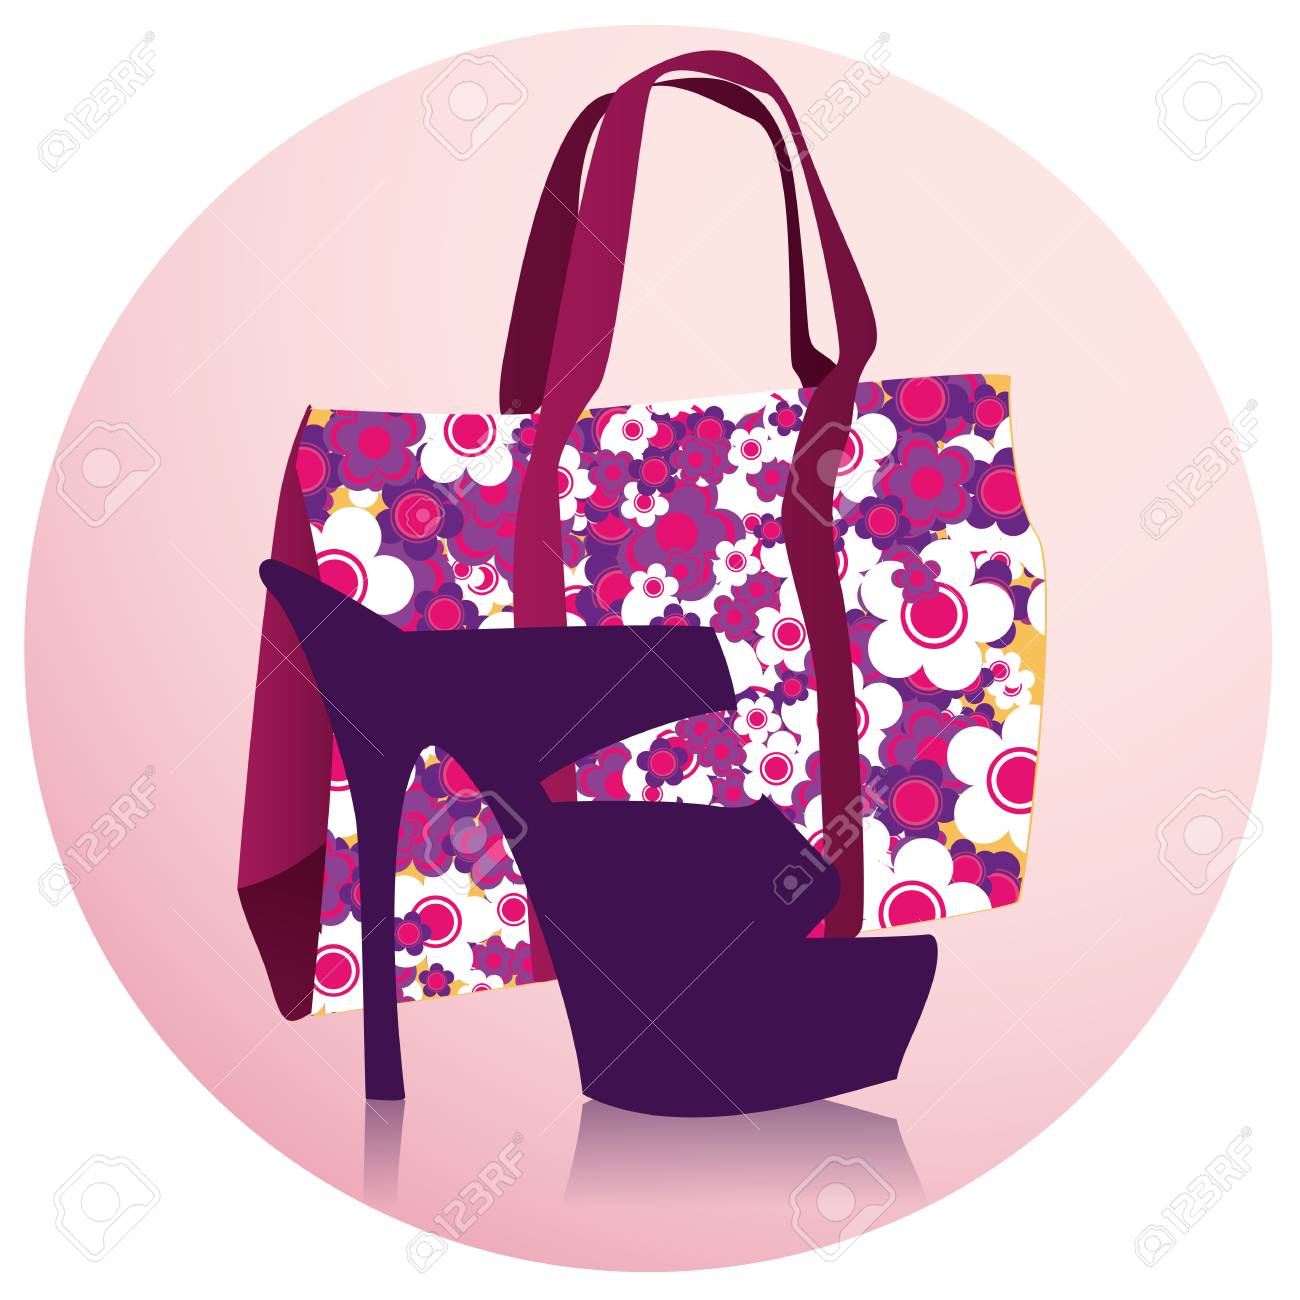 Women bags and shoes